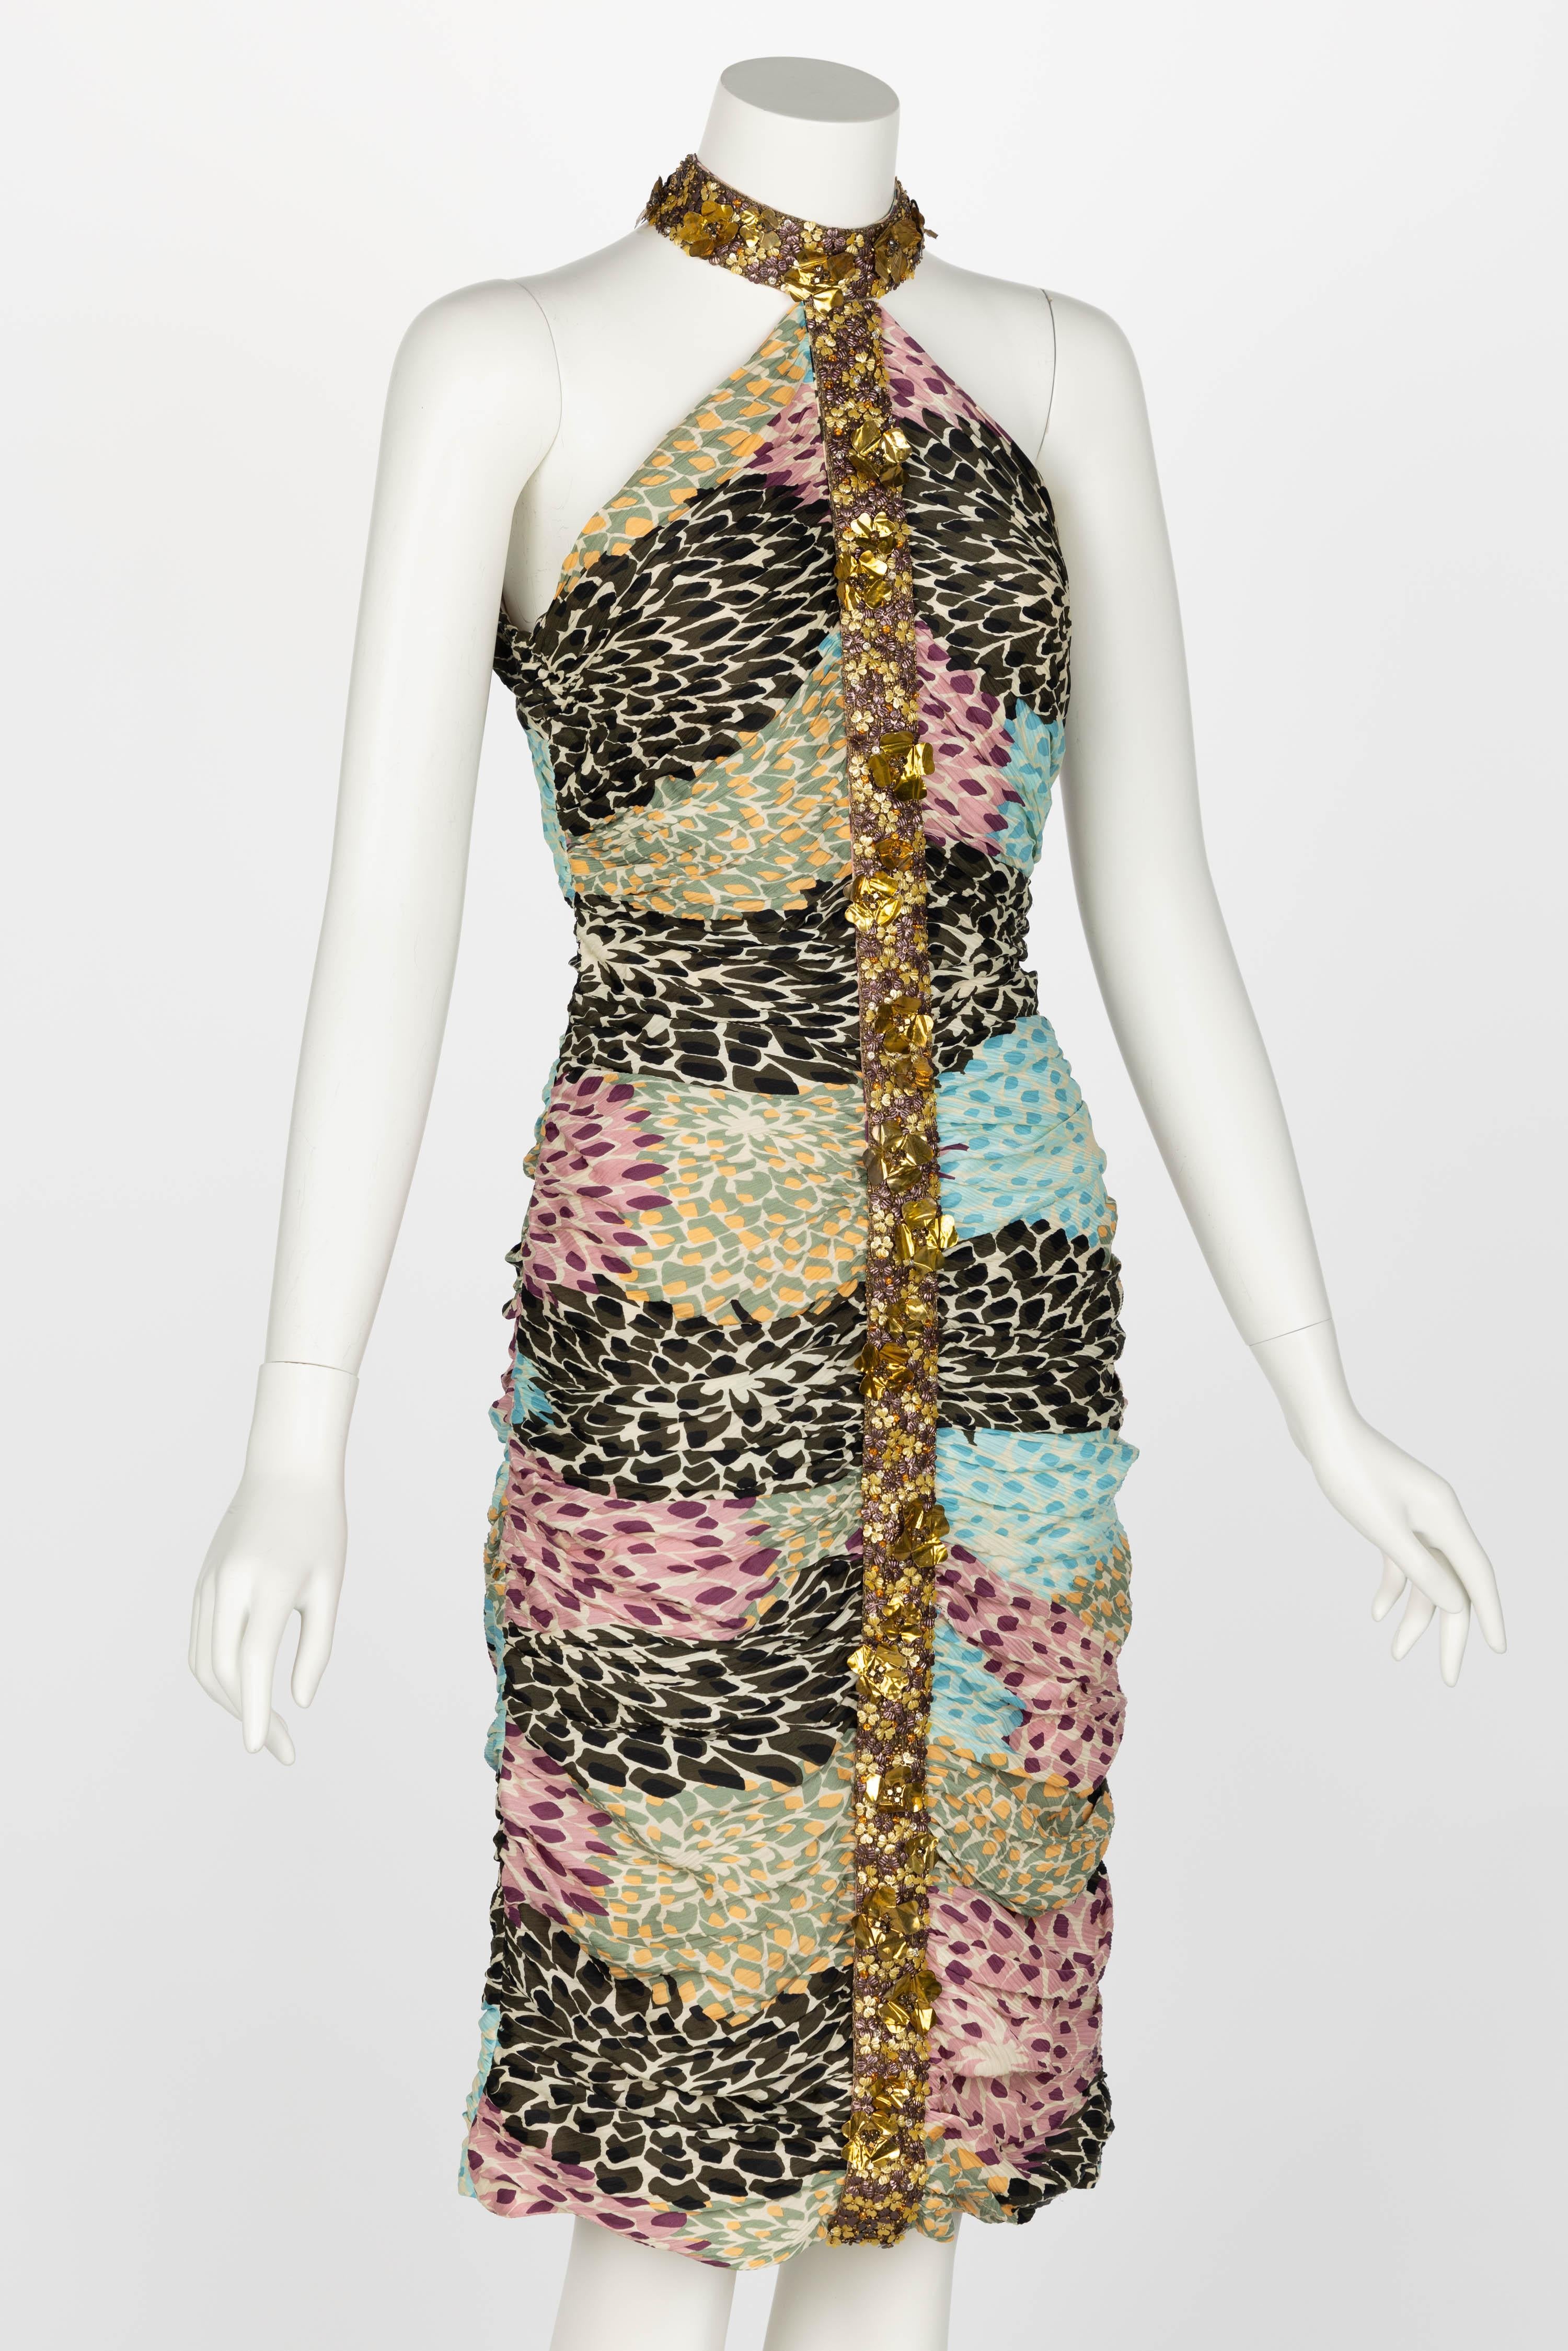 Missoni Embellished Silk Print Halter Dress F/W 2005 In Excellent Condition For Sale In Boca Raton, FL